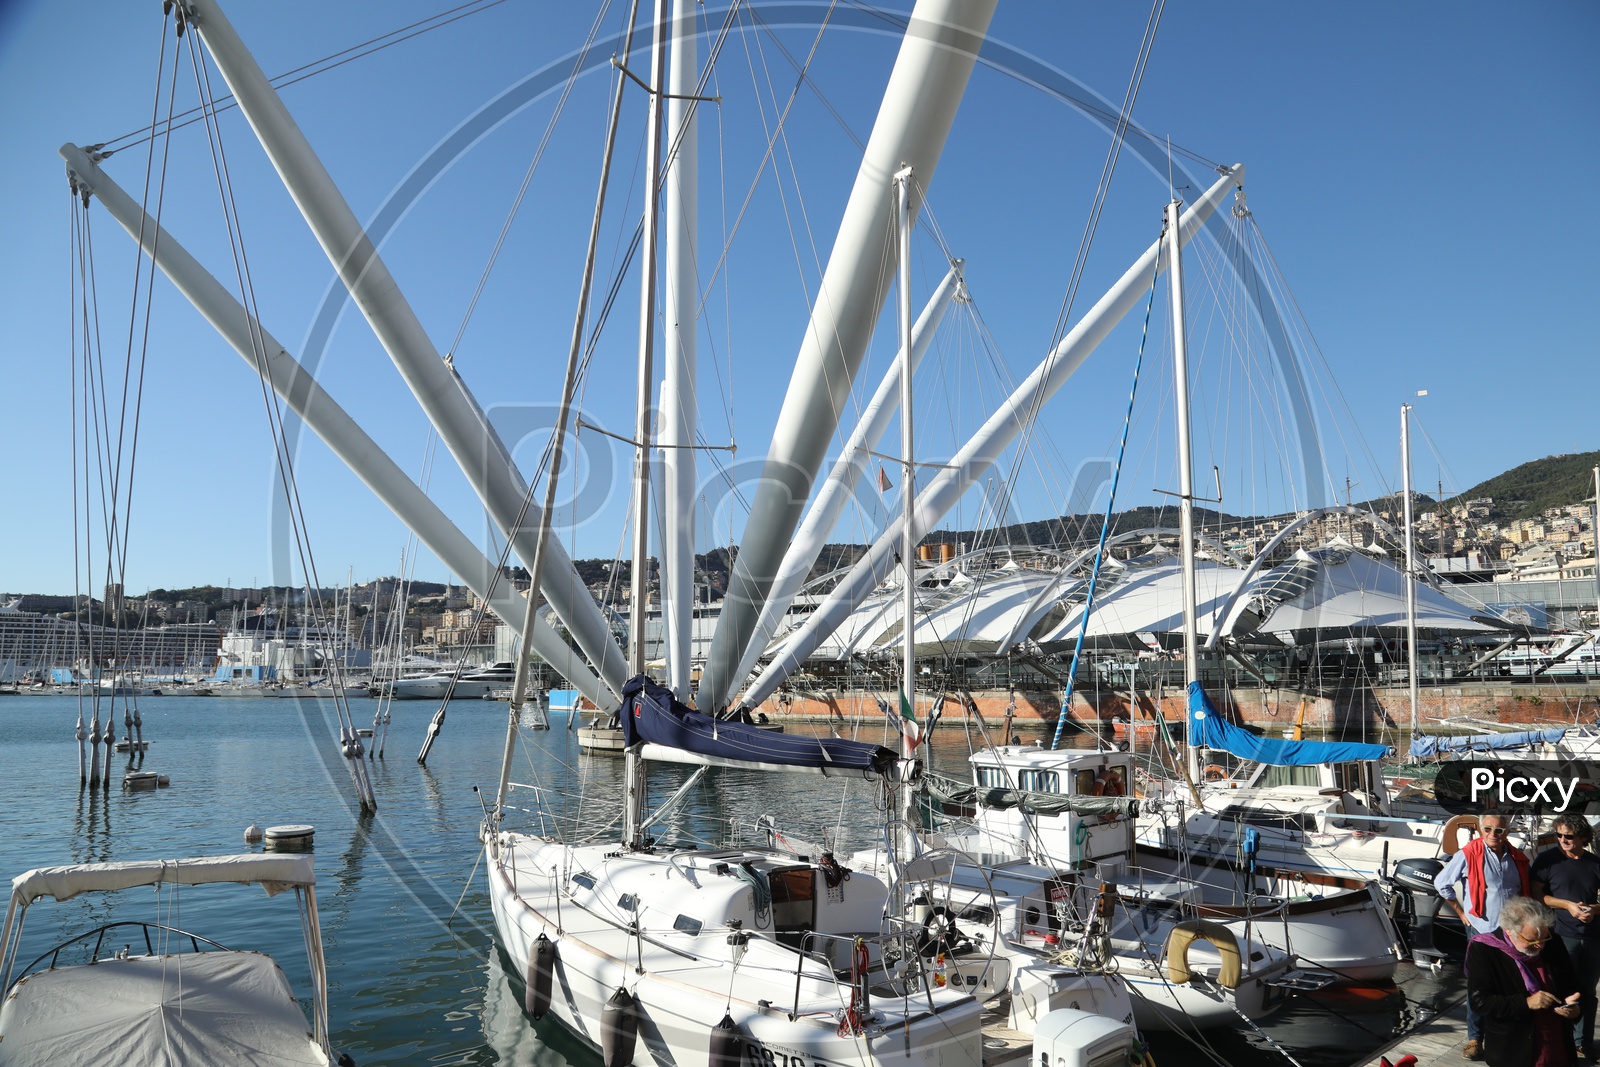 Group of Yachts at a Harbour